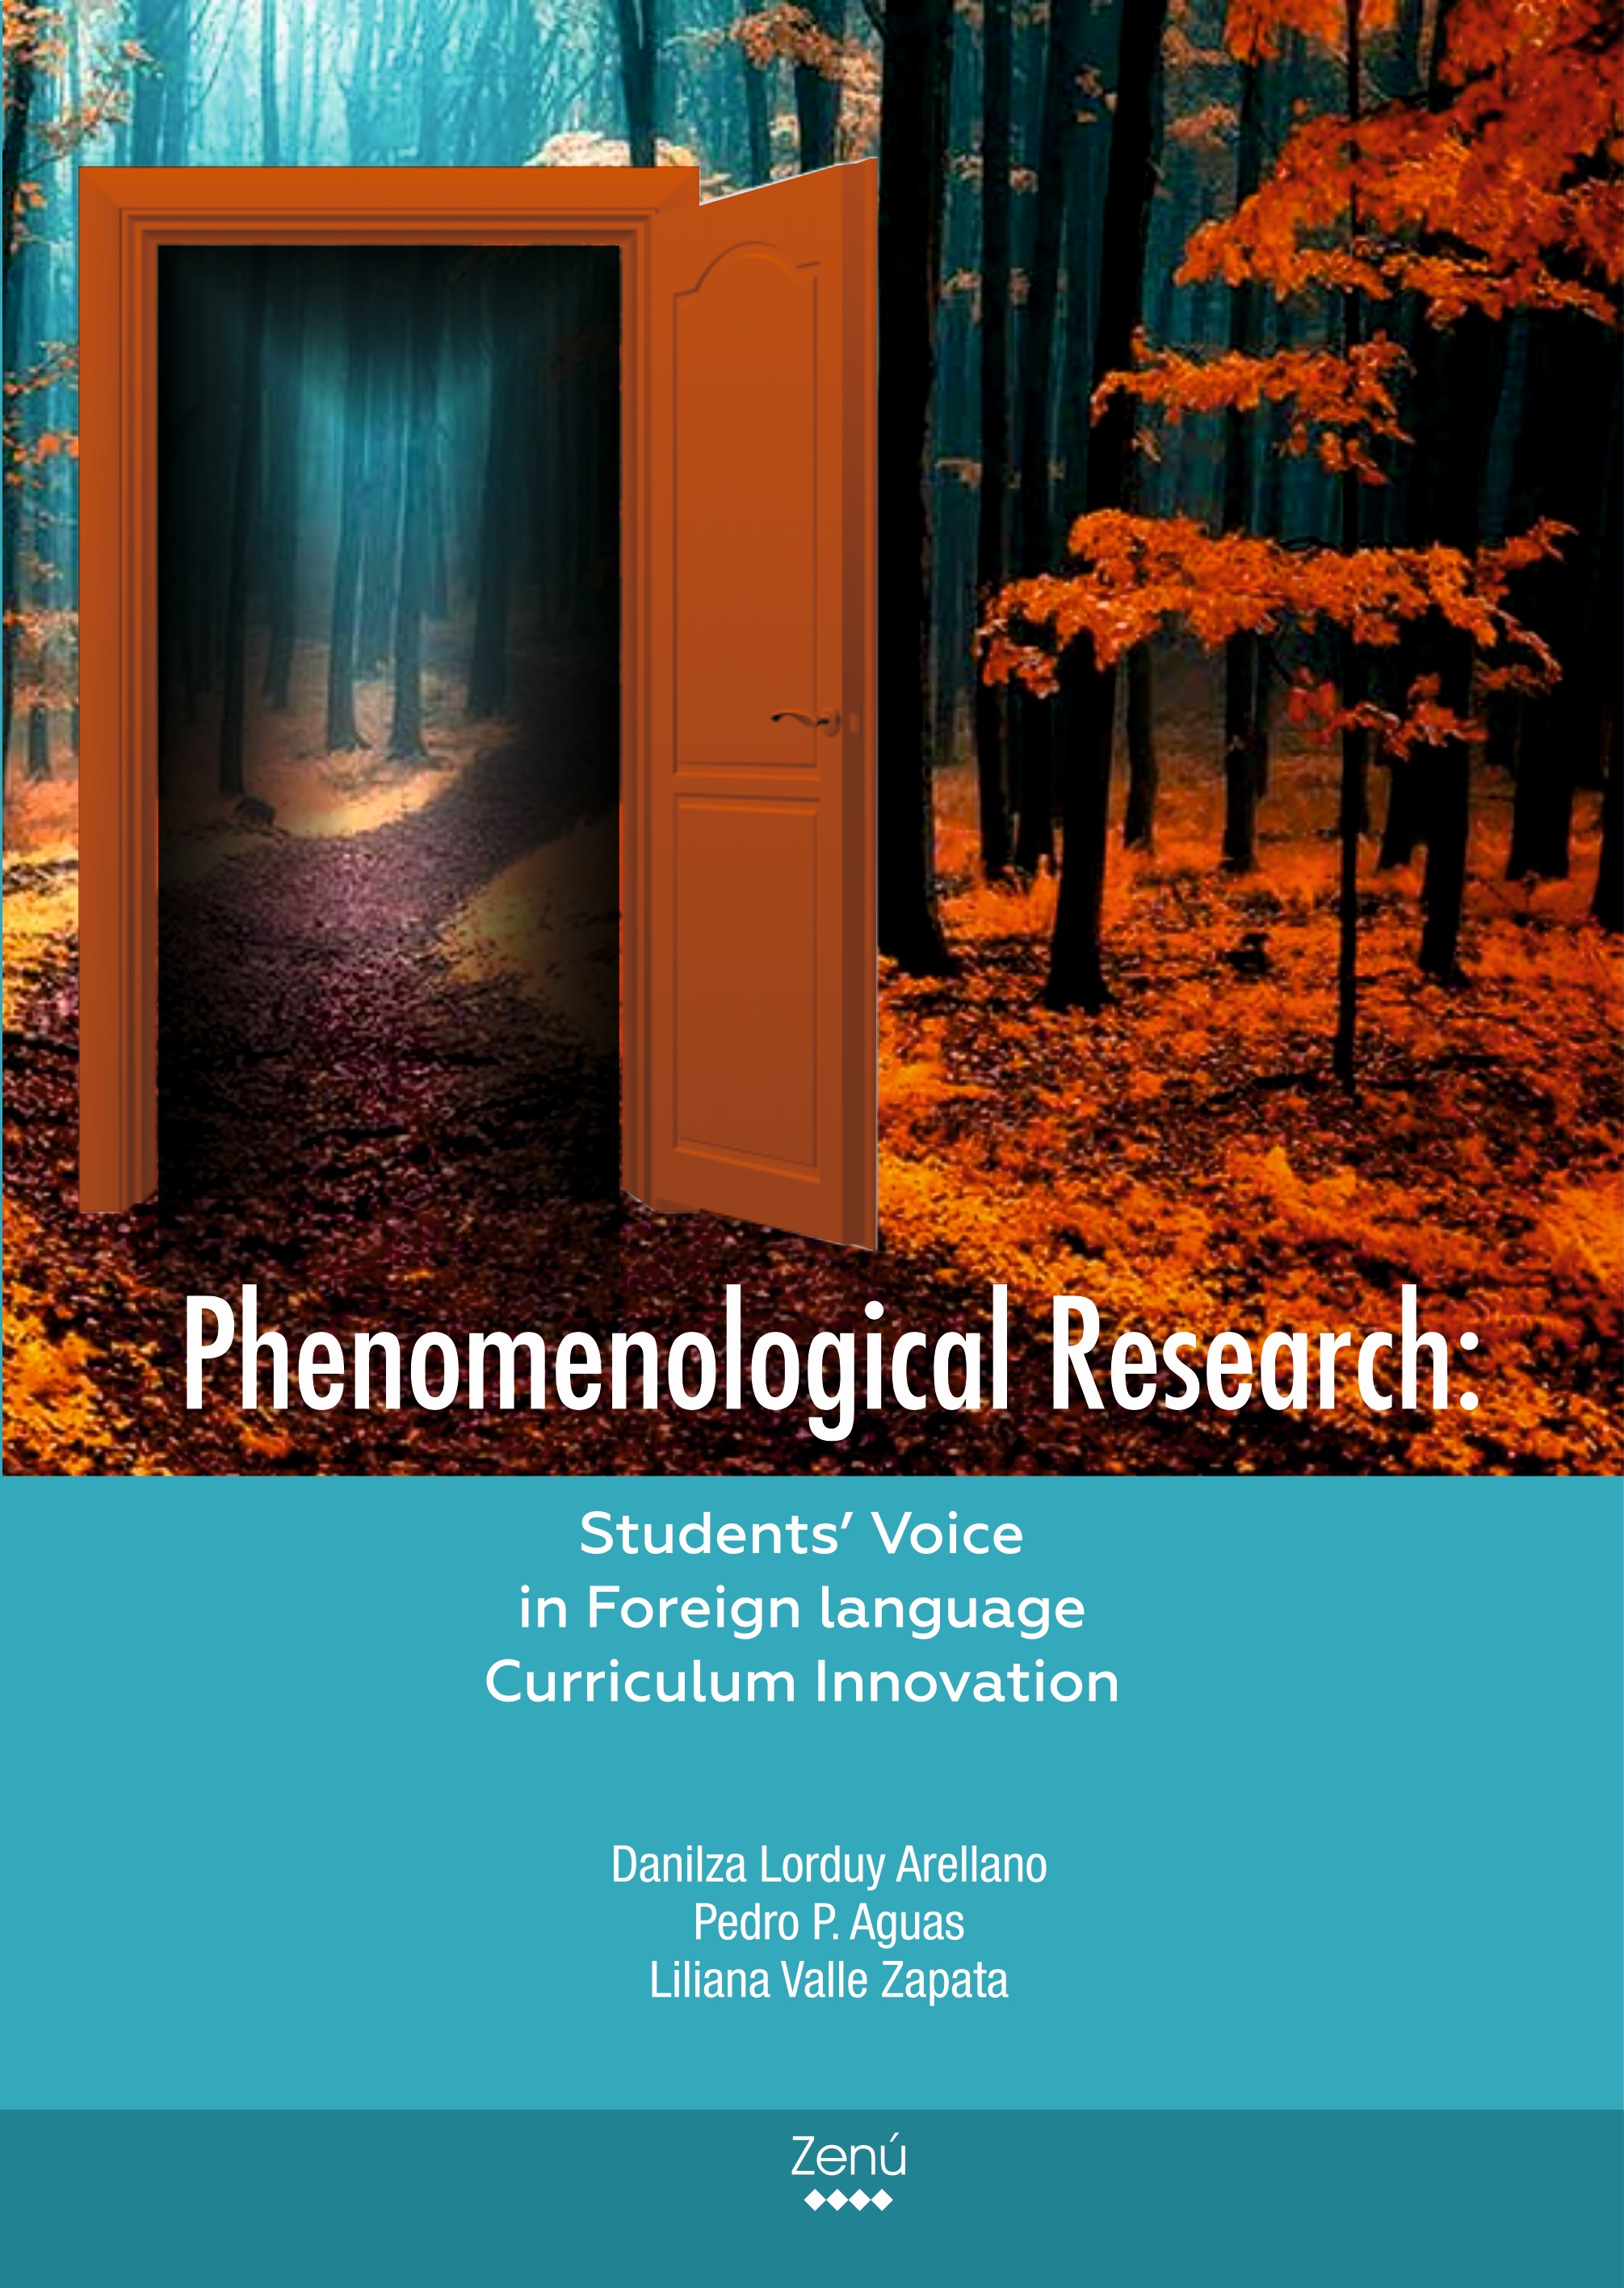 Phenomenological Research: Students’ voices in foreign language curriculum innovation